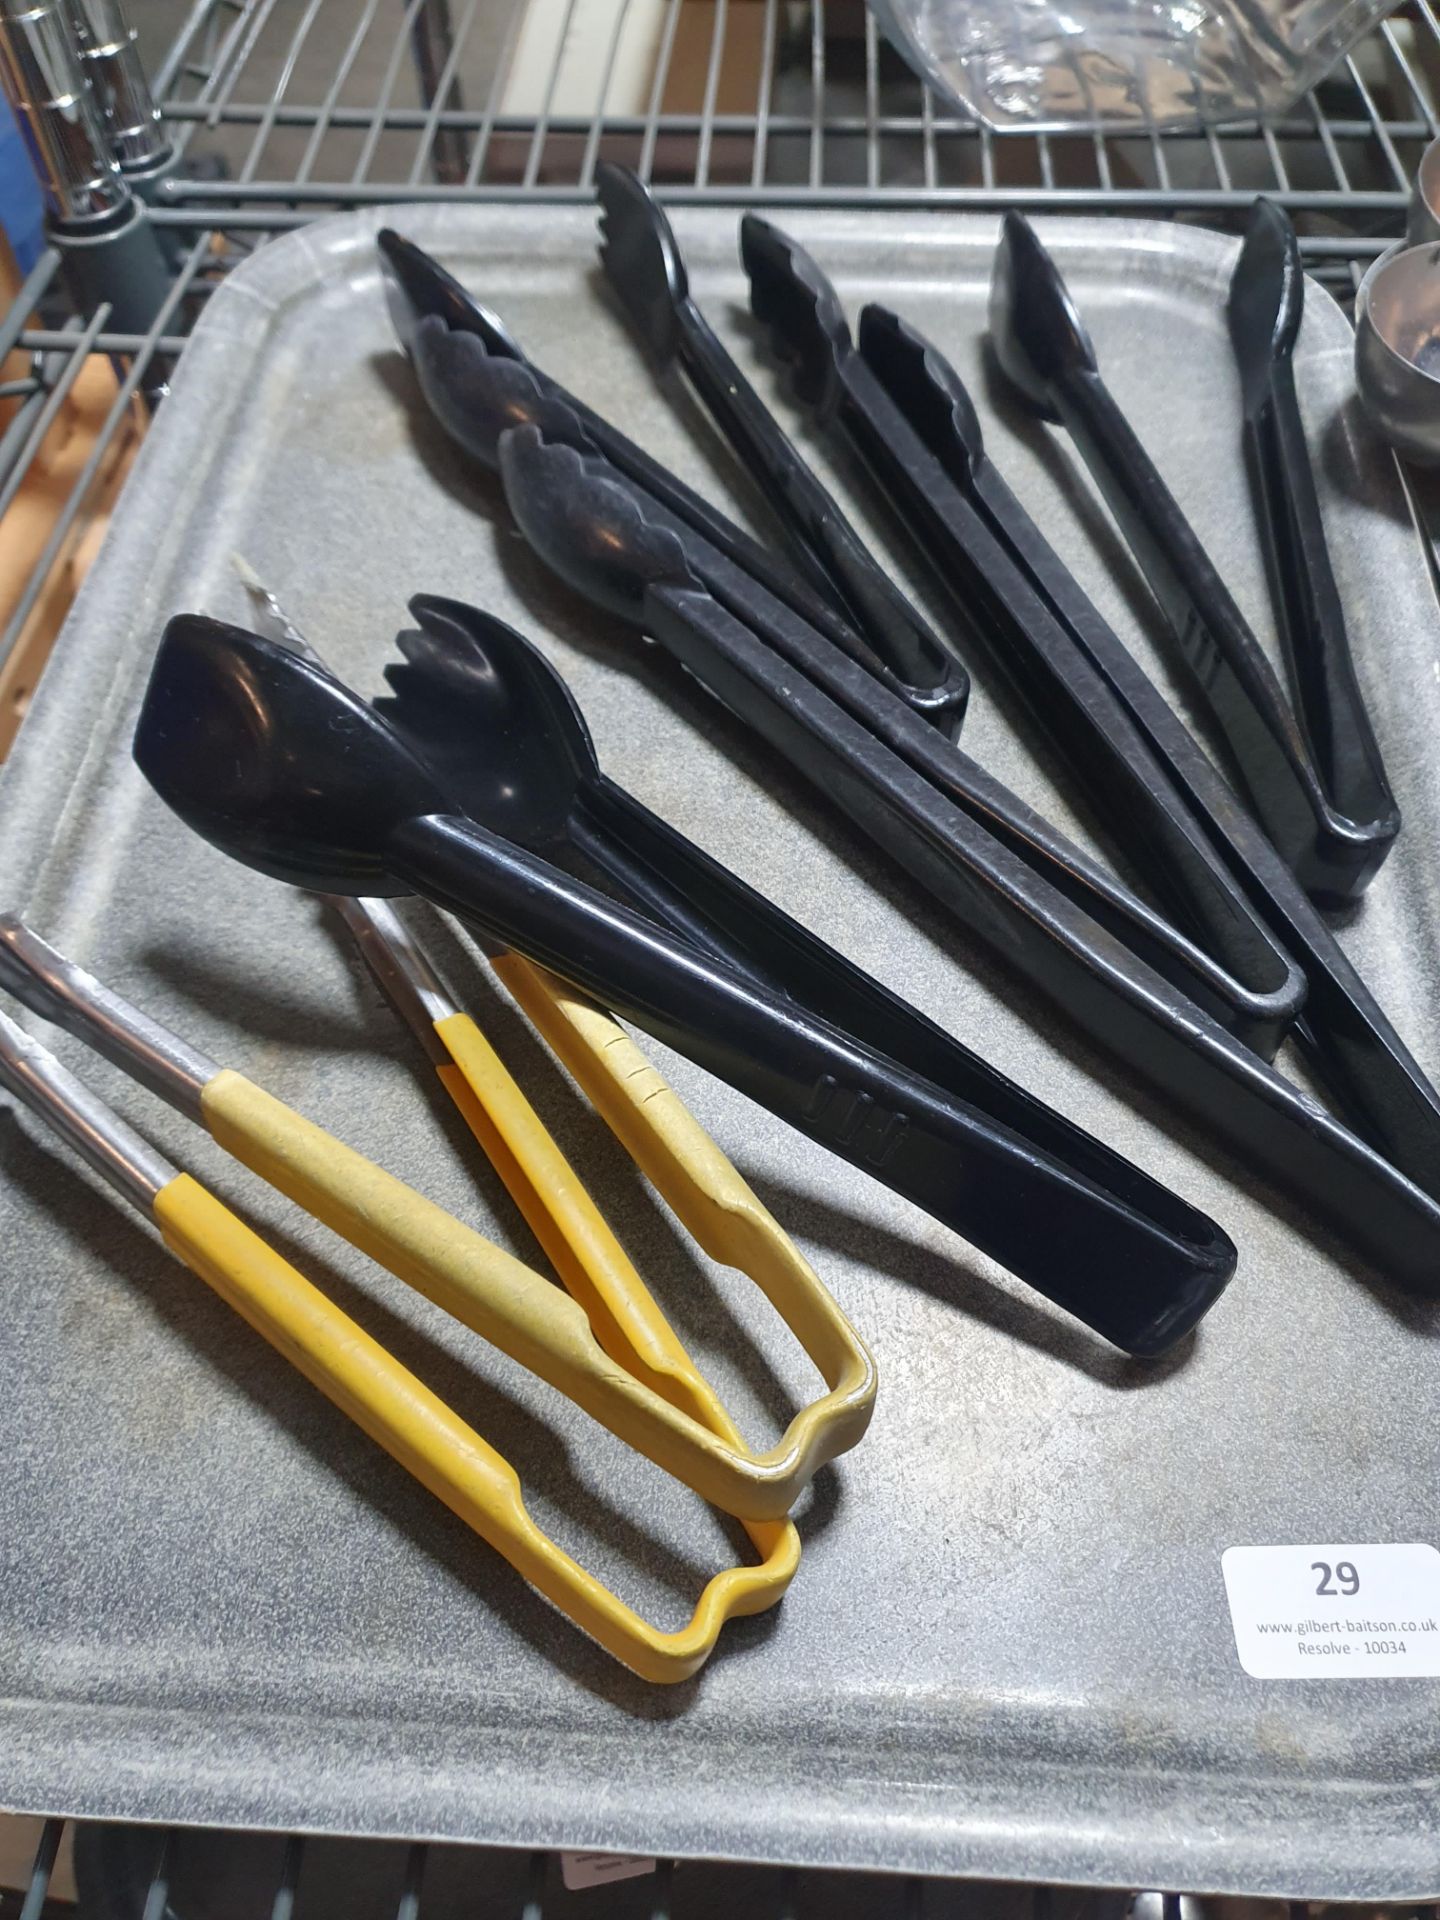 * selection of tongs